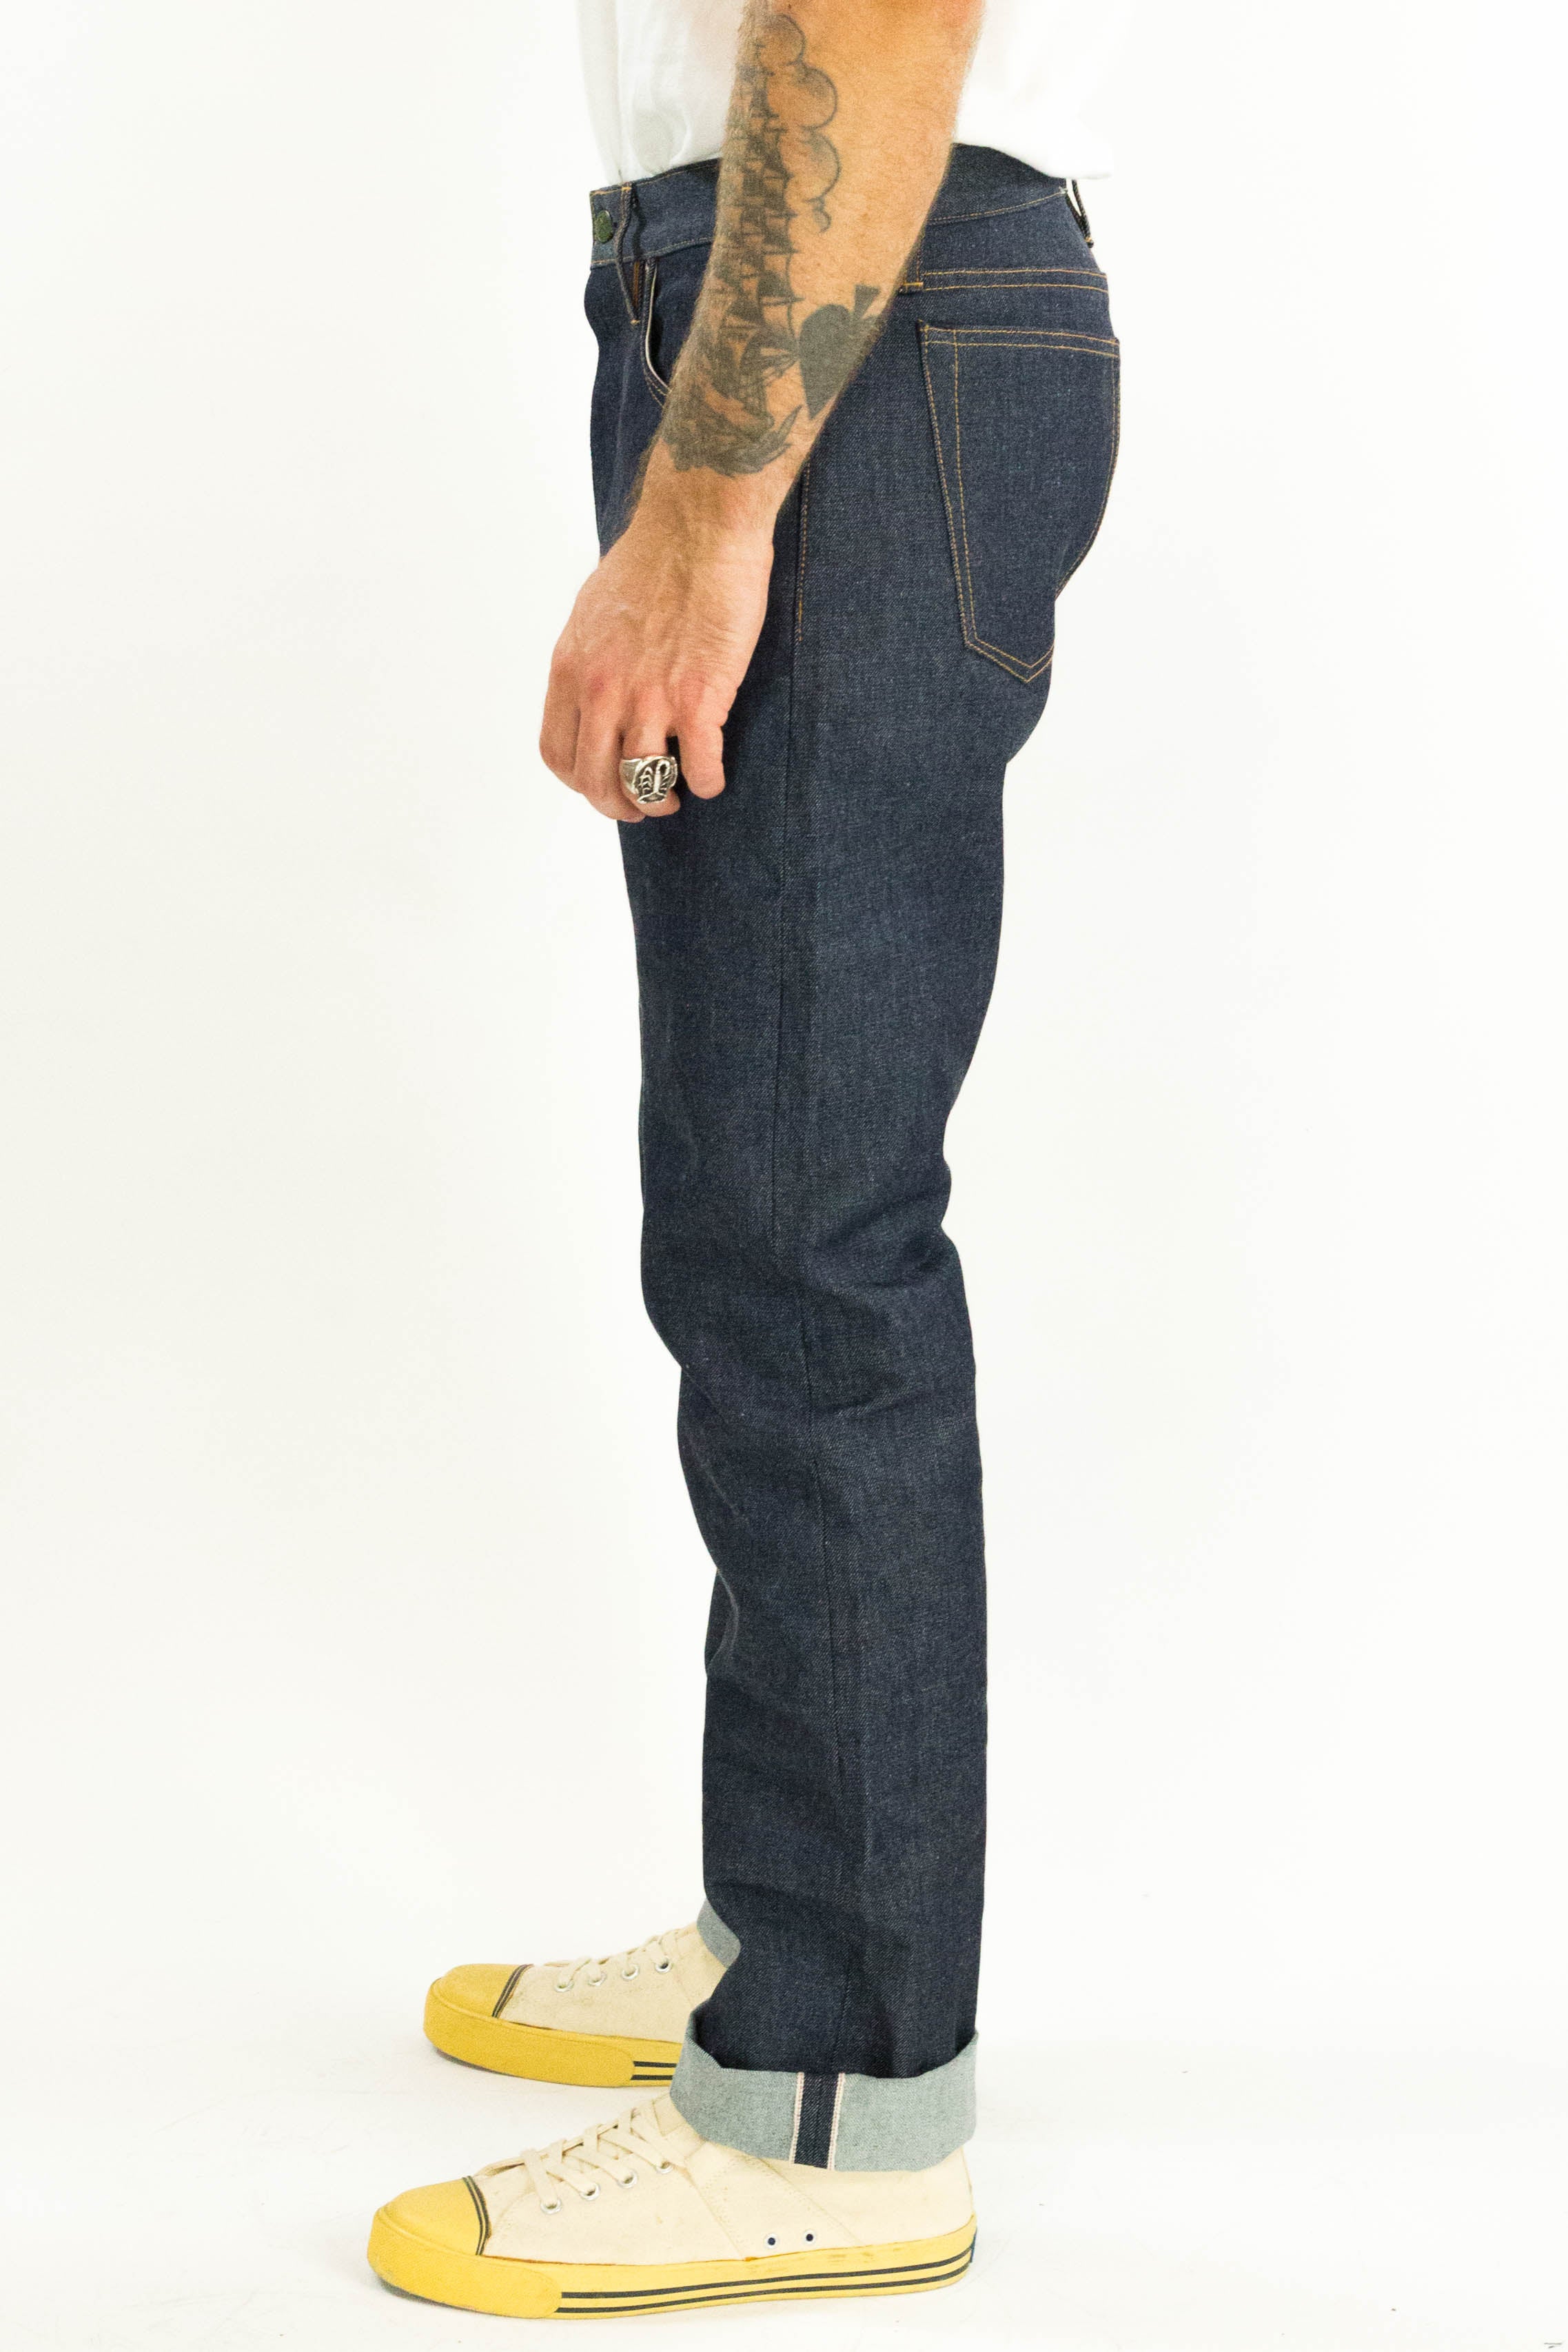 First attempt at Jeans- Slim Straight in 14oz Selvedge Denim : r